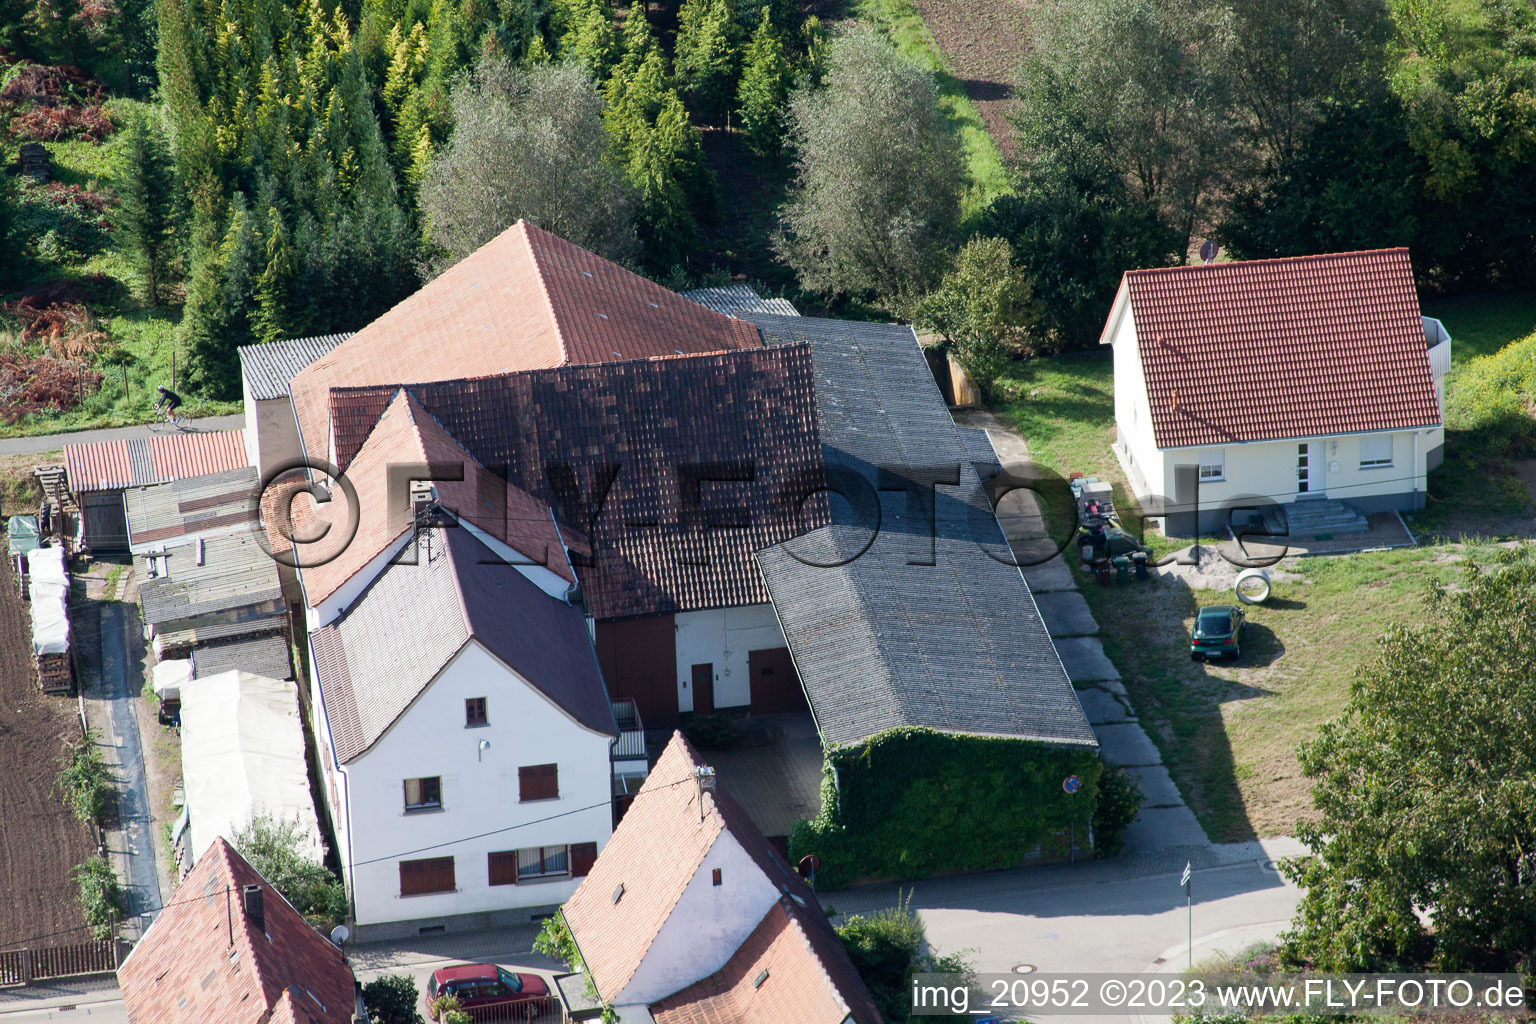 Aerial photograpy of At the kiln in Freckenfeld in the state Rhineland-Palatinate, Germany